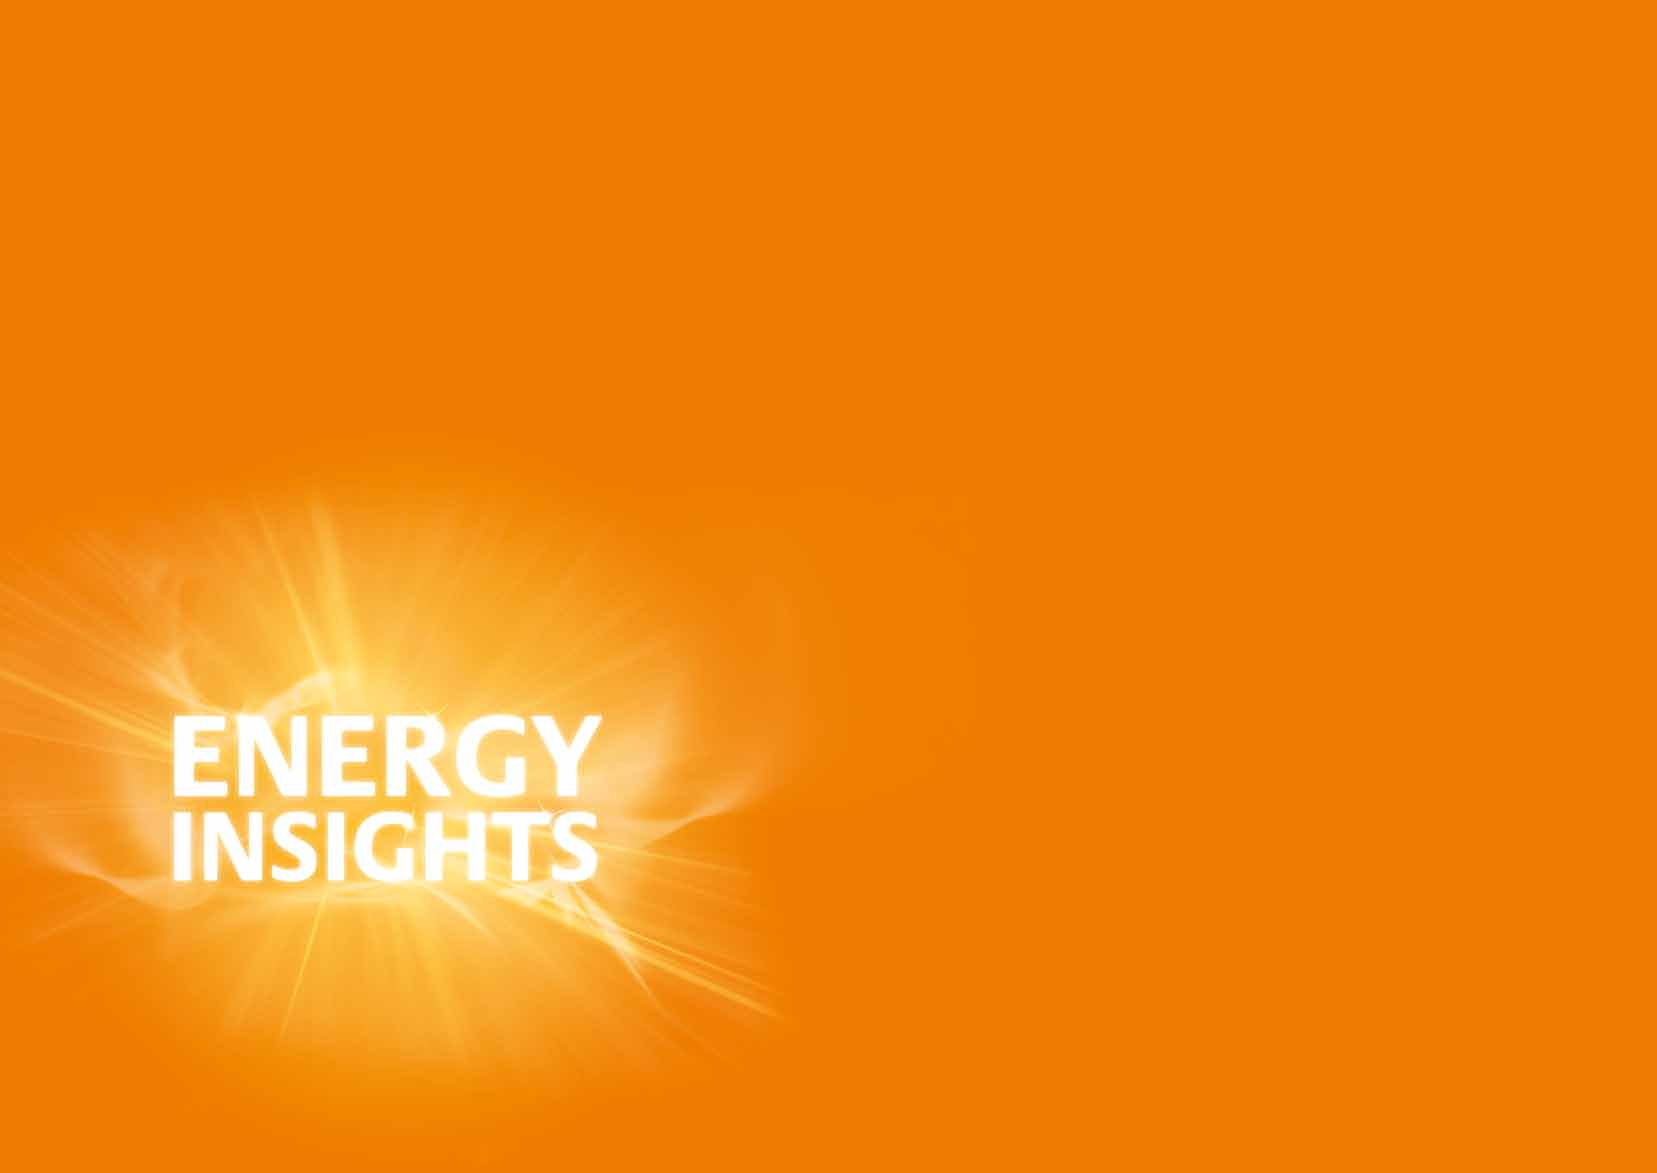 Meet- selectie en ontwerp tools HYDRONIC COLLEGE ENERGY INSIGHTS SEMINARS KNOW-HOW & SOFTWARE Cumuleer de besparingen met Energy Insight Seminars TA Hydronics Energy Insight Seminars verhogen het